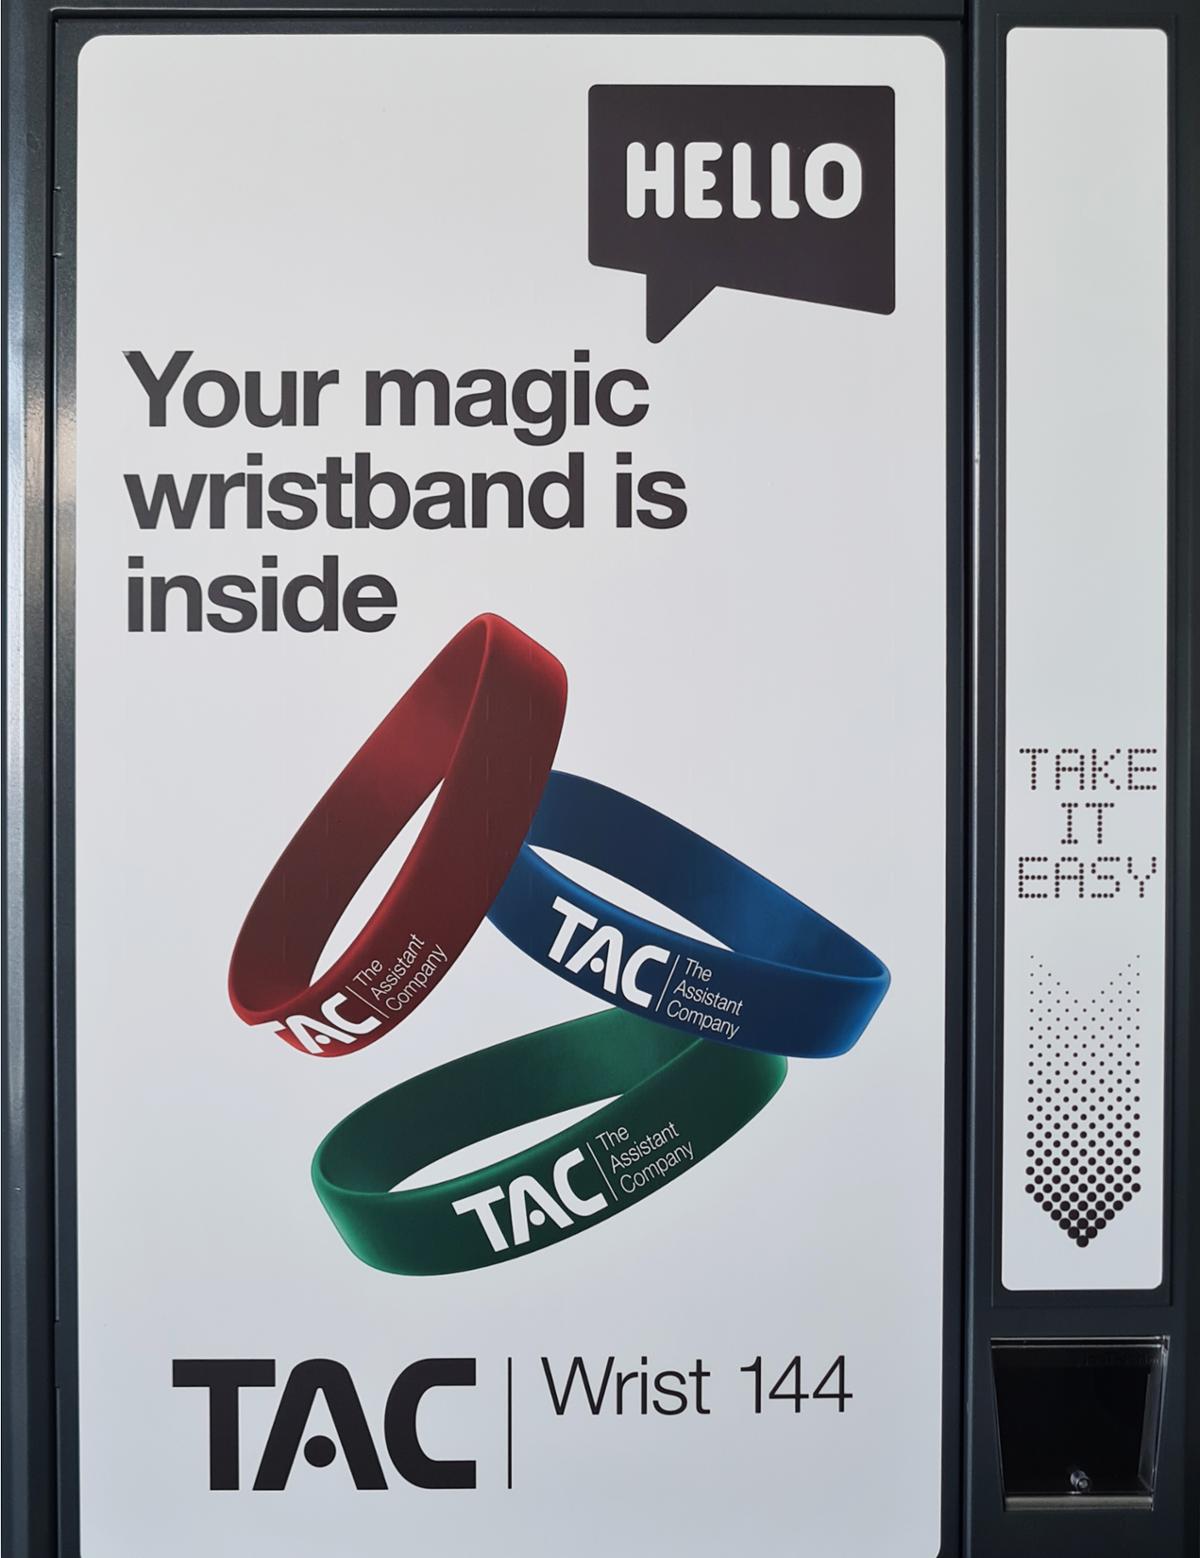 TAC Wrist 144 is a wall-mounted dispenser which can hold 144 bands, while TAC Wrist 900 is a free-standing machine with the capacity for 900 bracelets / TAC